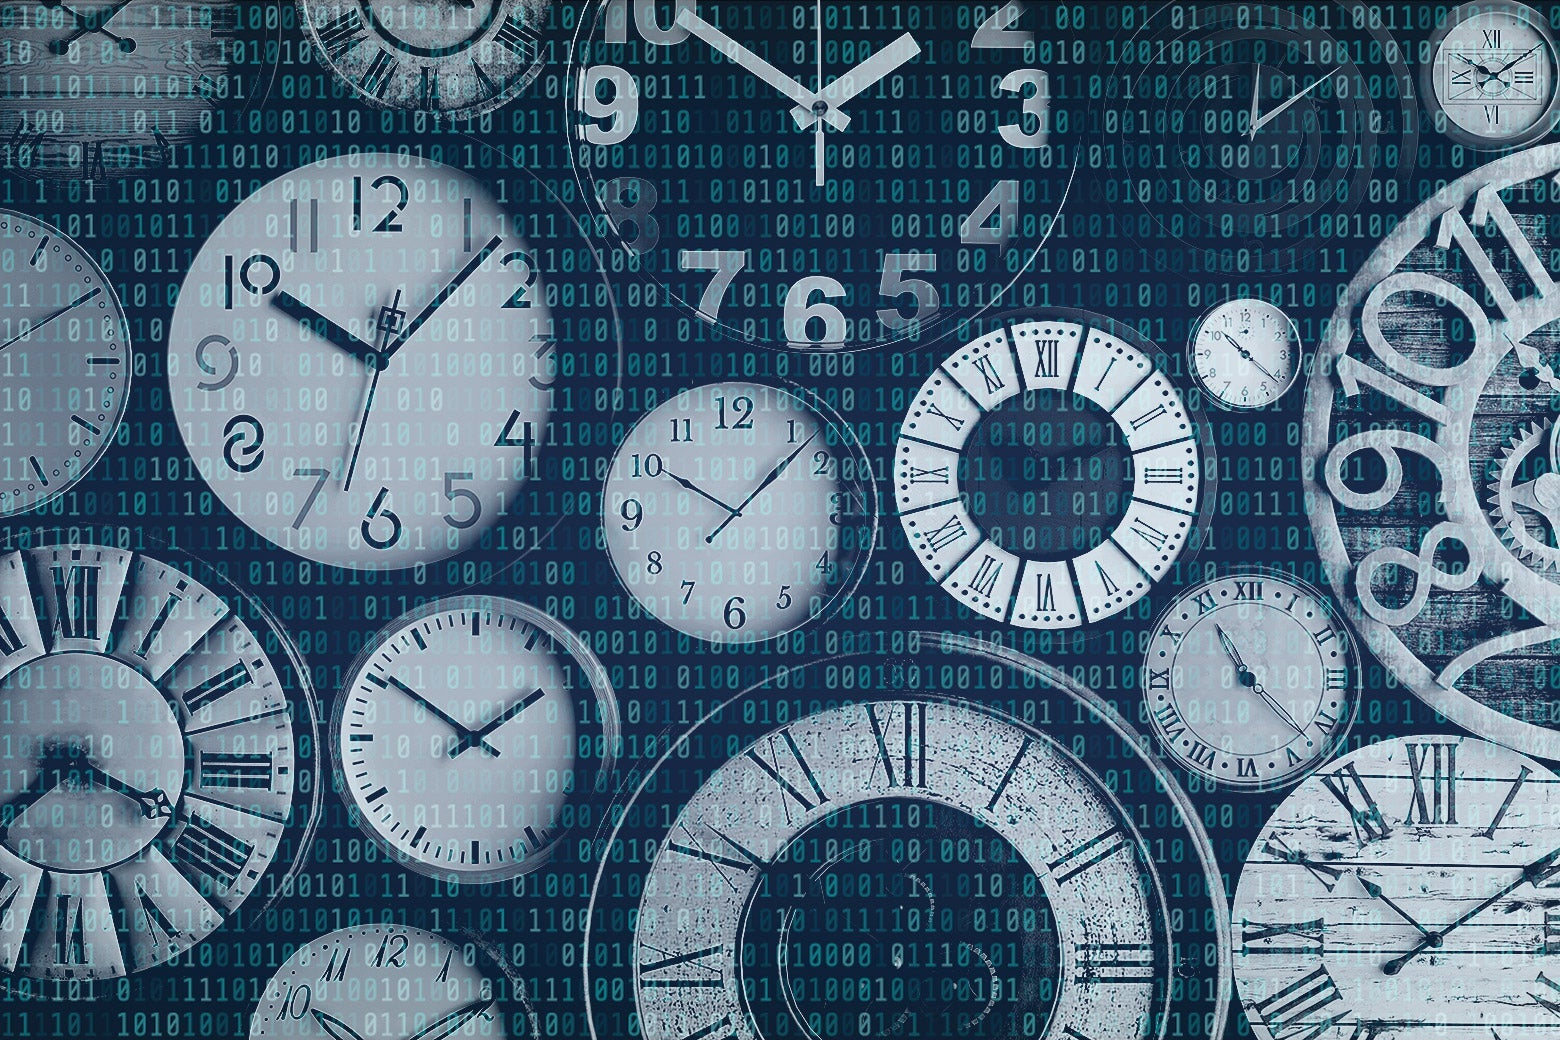 A collection of clocks with binary code overlaid on top.